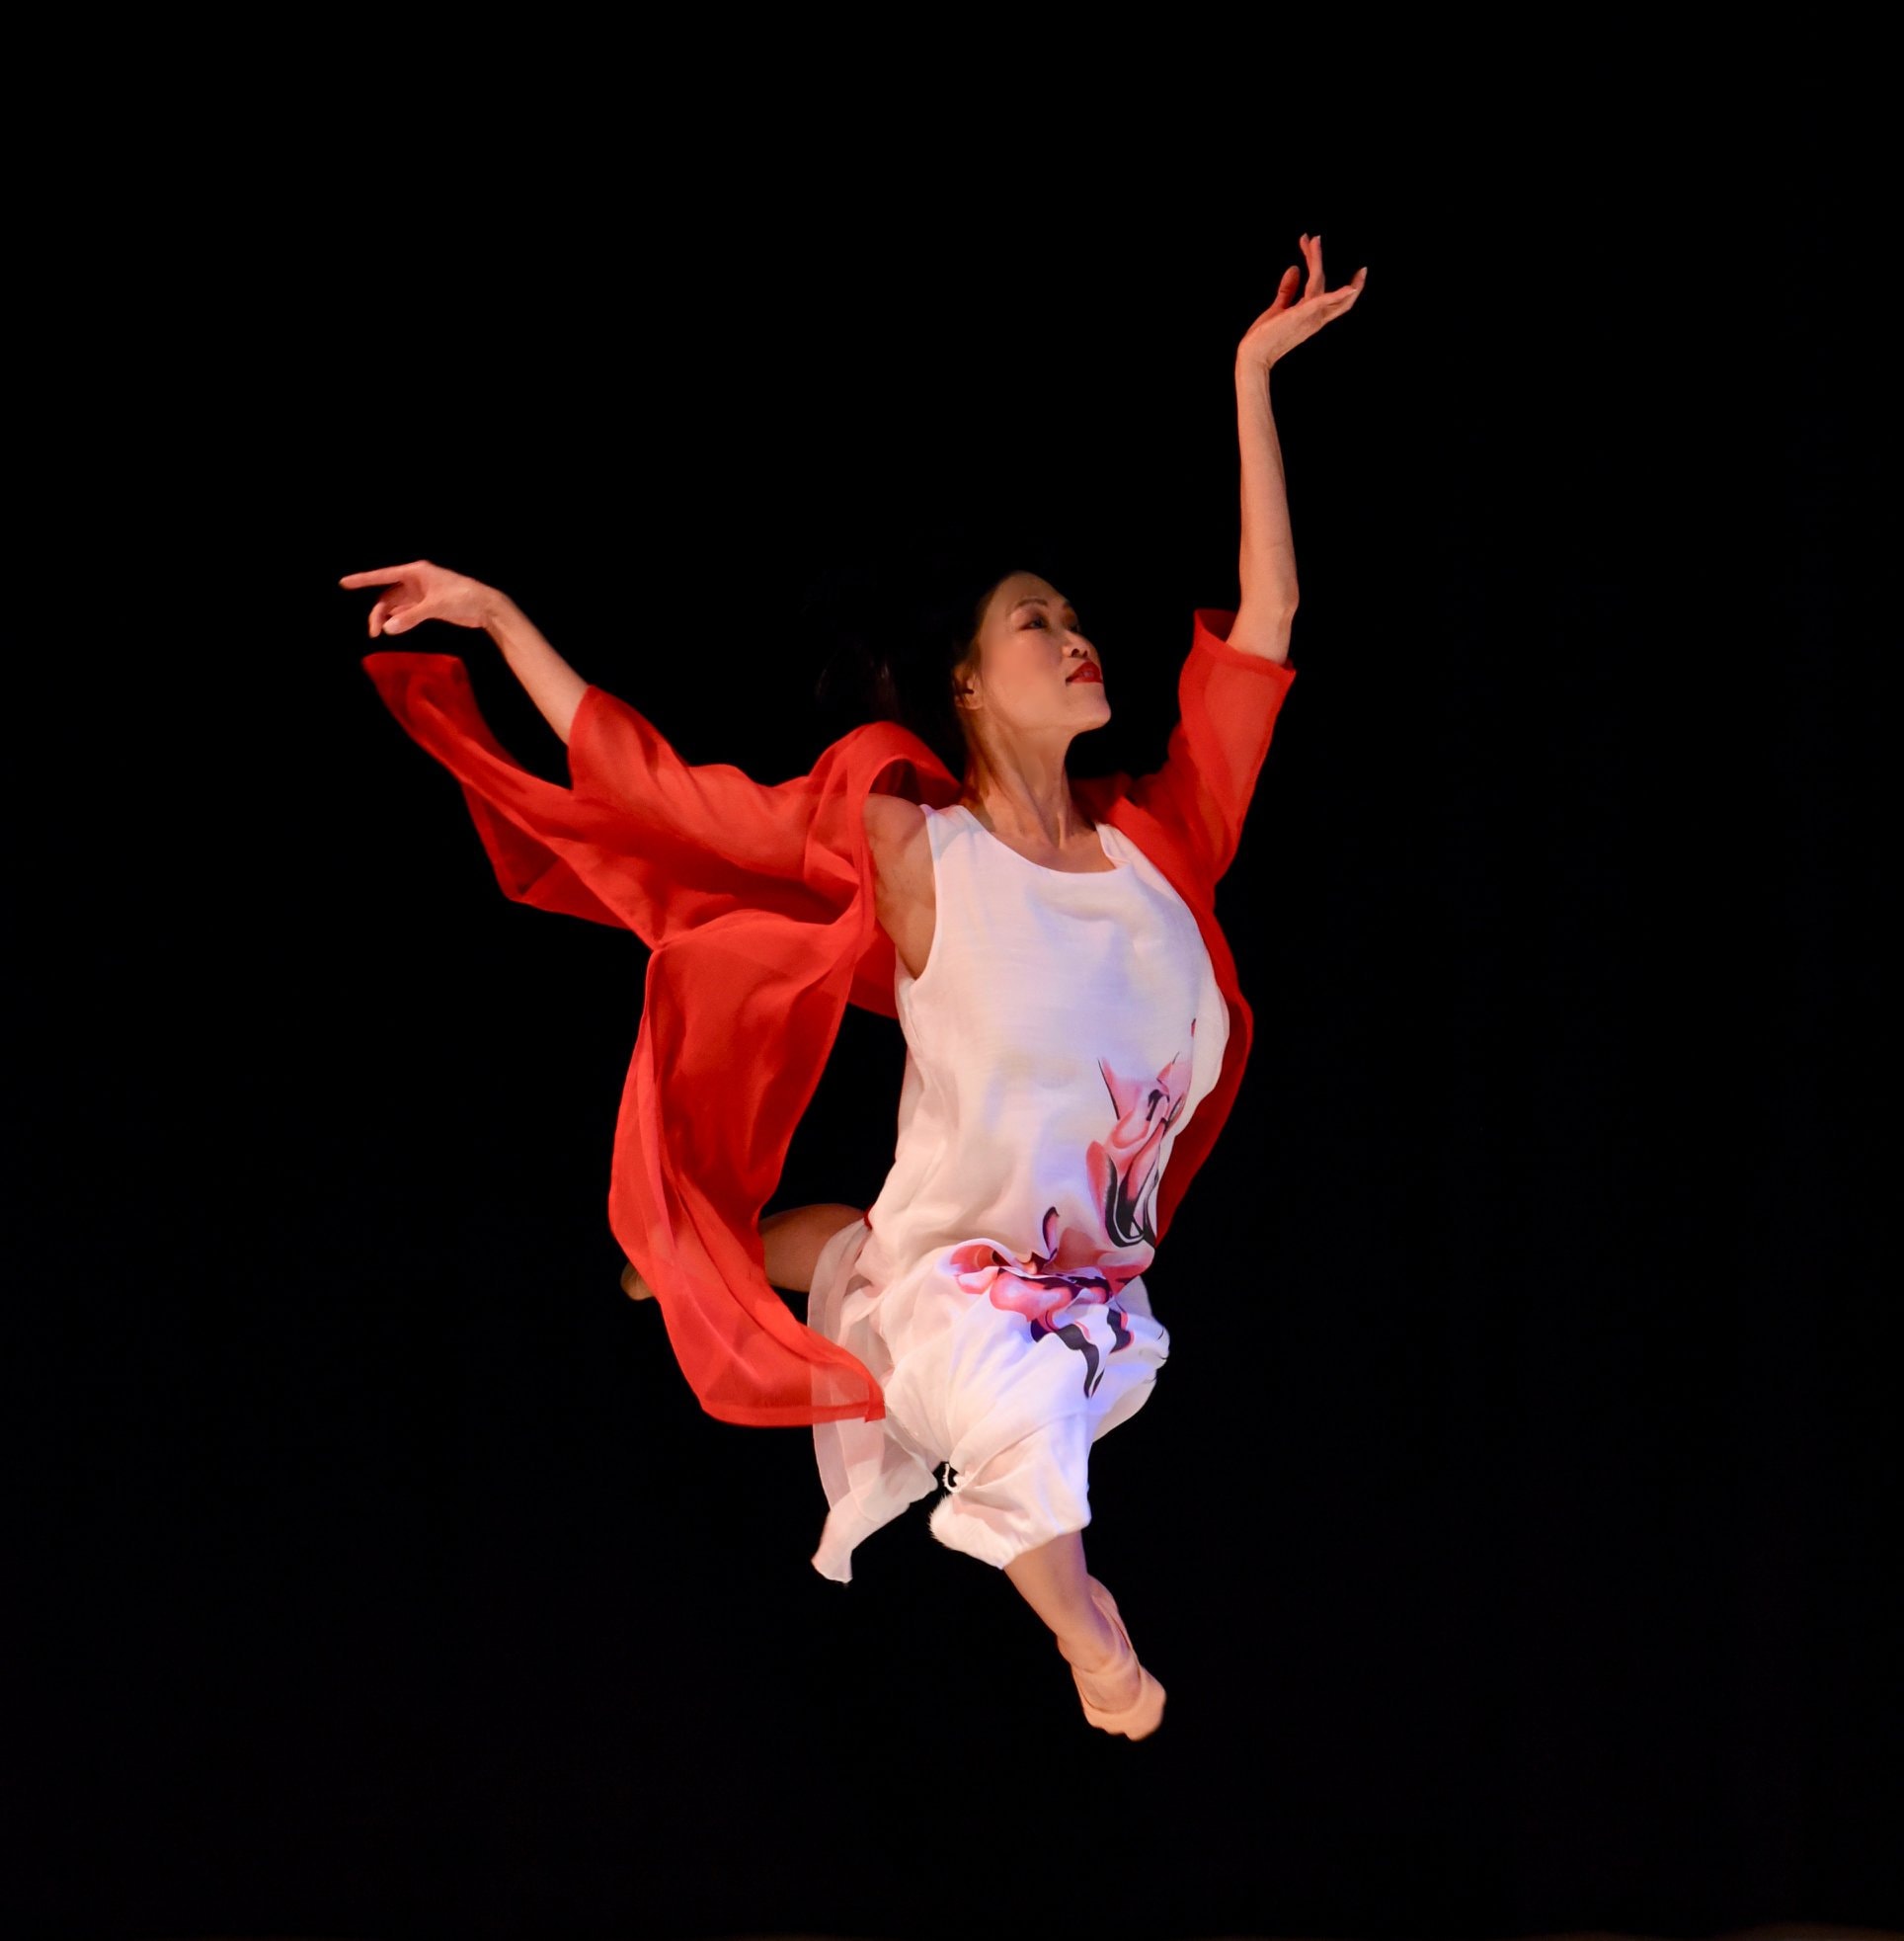 Shu-Chen Cuff and Gin Dance Company will premiere "We, The Moon, The Sun" during the 2019 Atlas INTERSECTIONS Festival. Photo by Ruth Judson/Gin Dance Company.